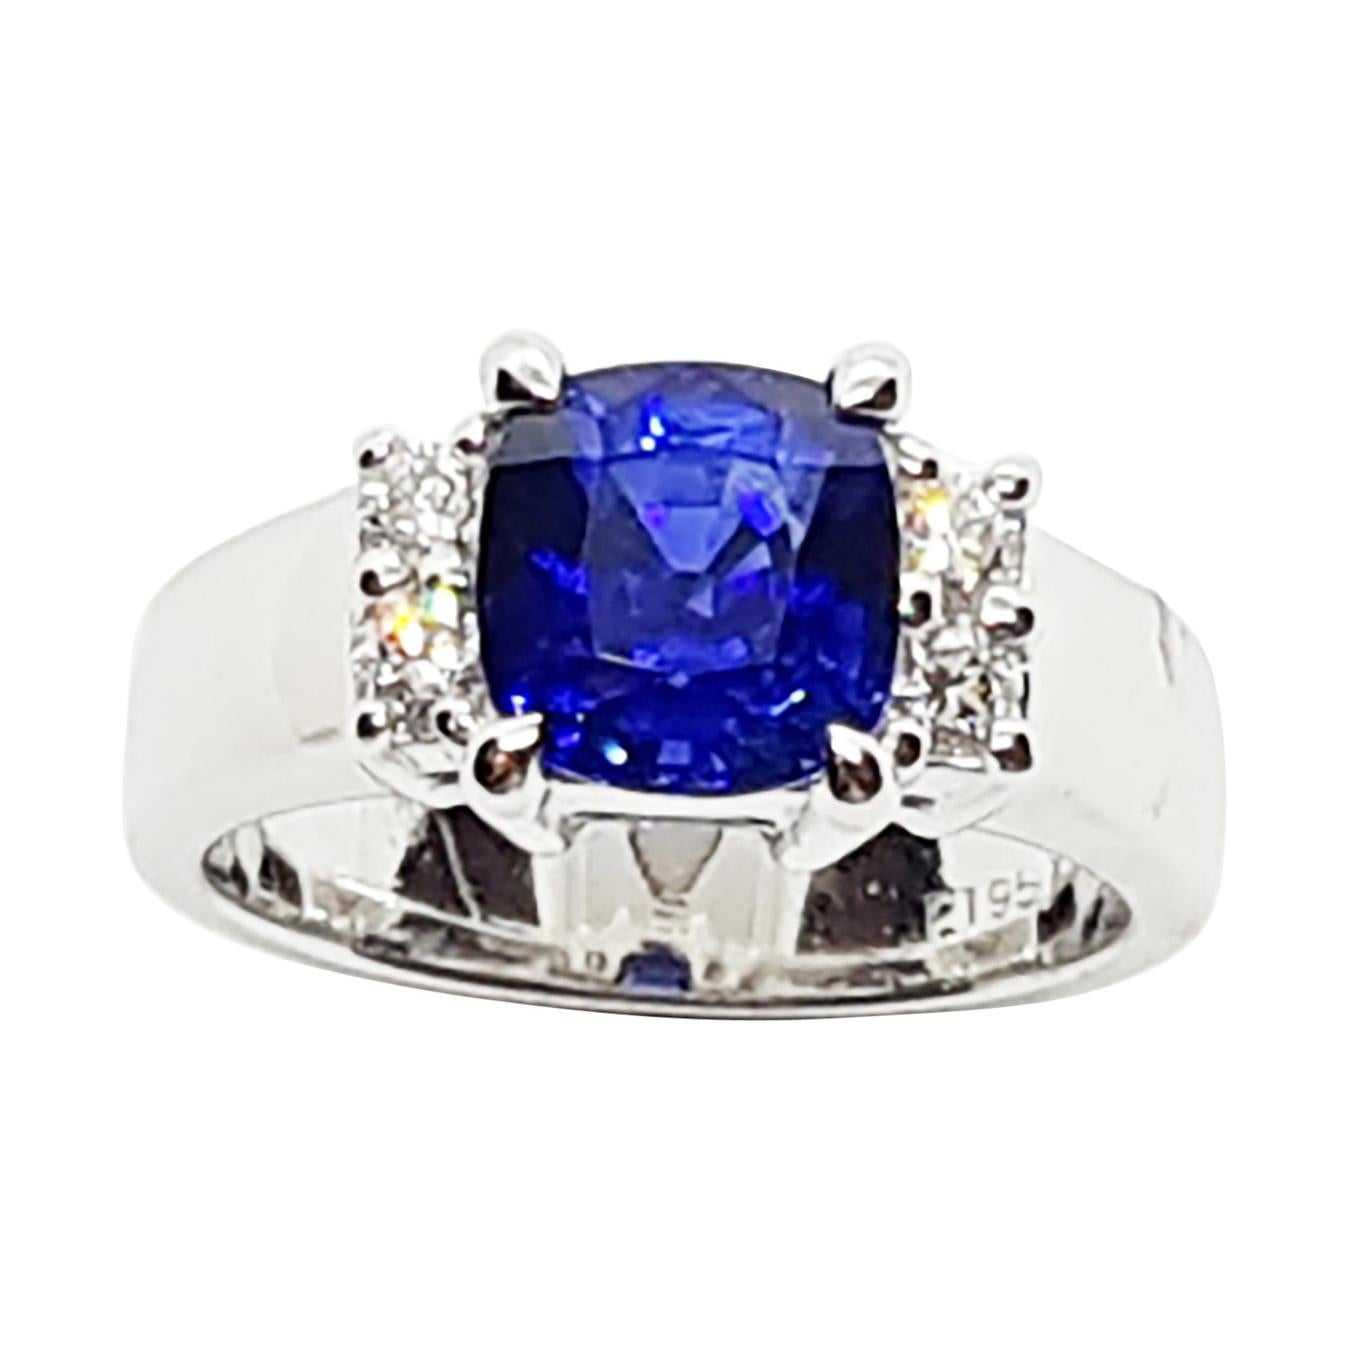 Certified Royal Blue Sapphire with Diamond Ring Set in Platinum 950 Settings